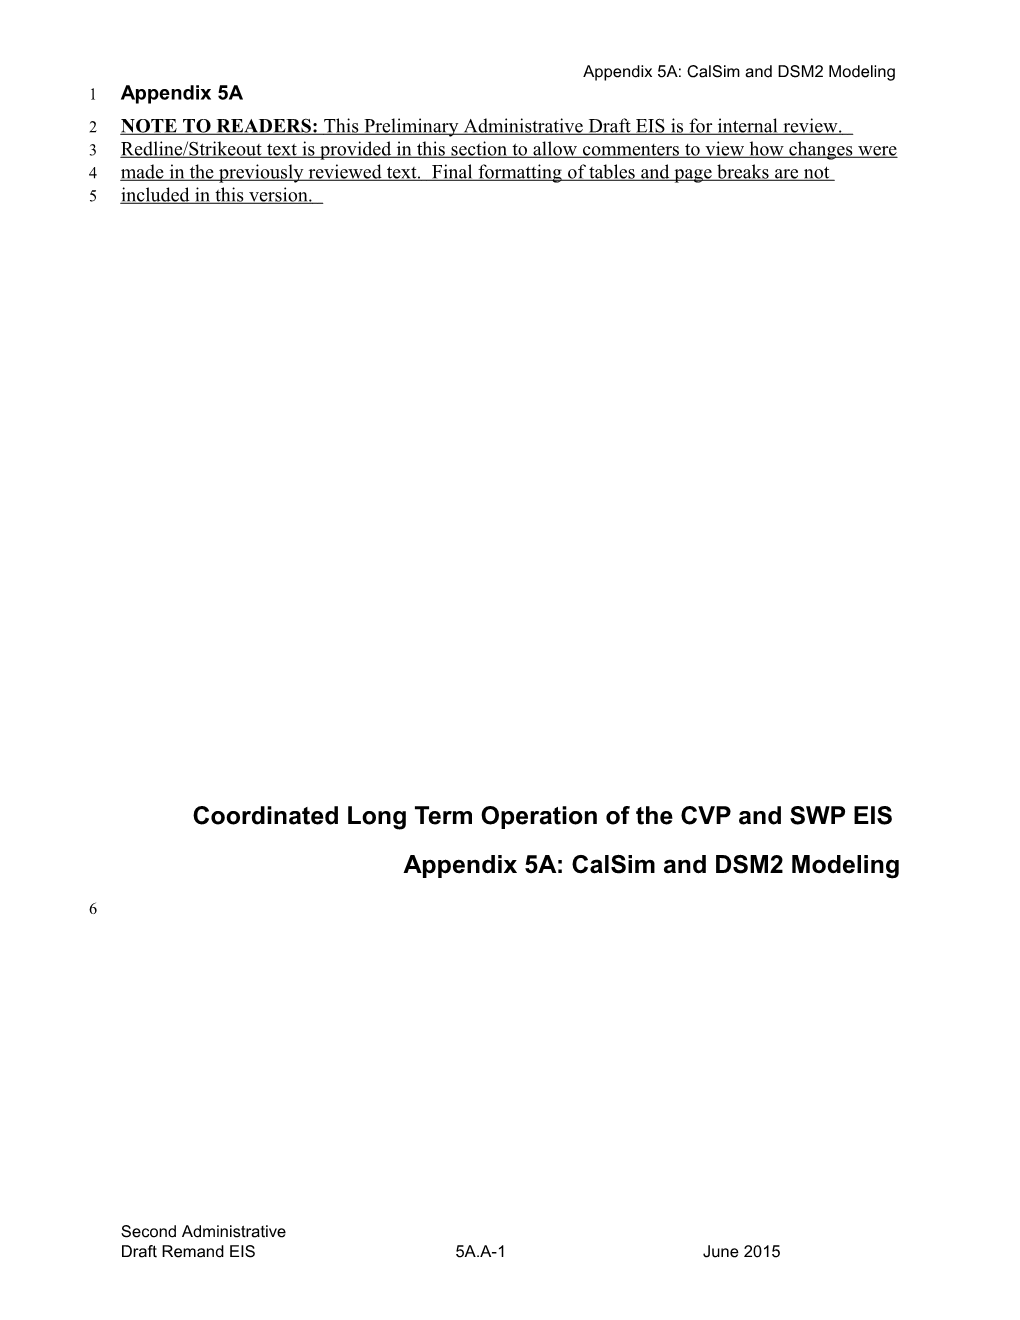 Coordinated Long Term Operation of the CVP and SWP EIS